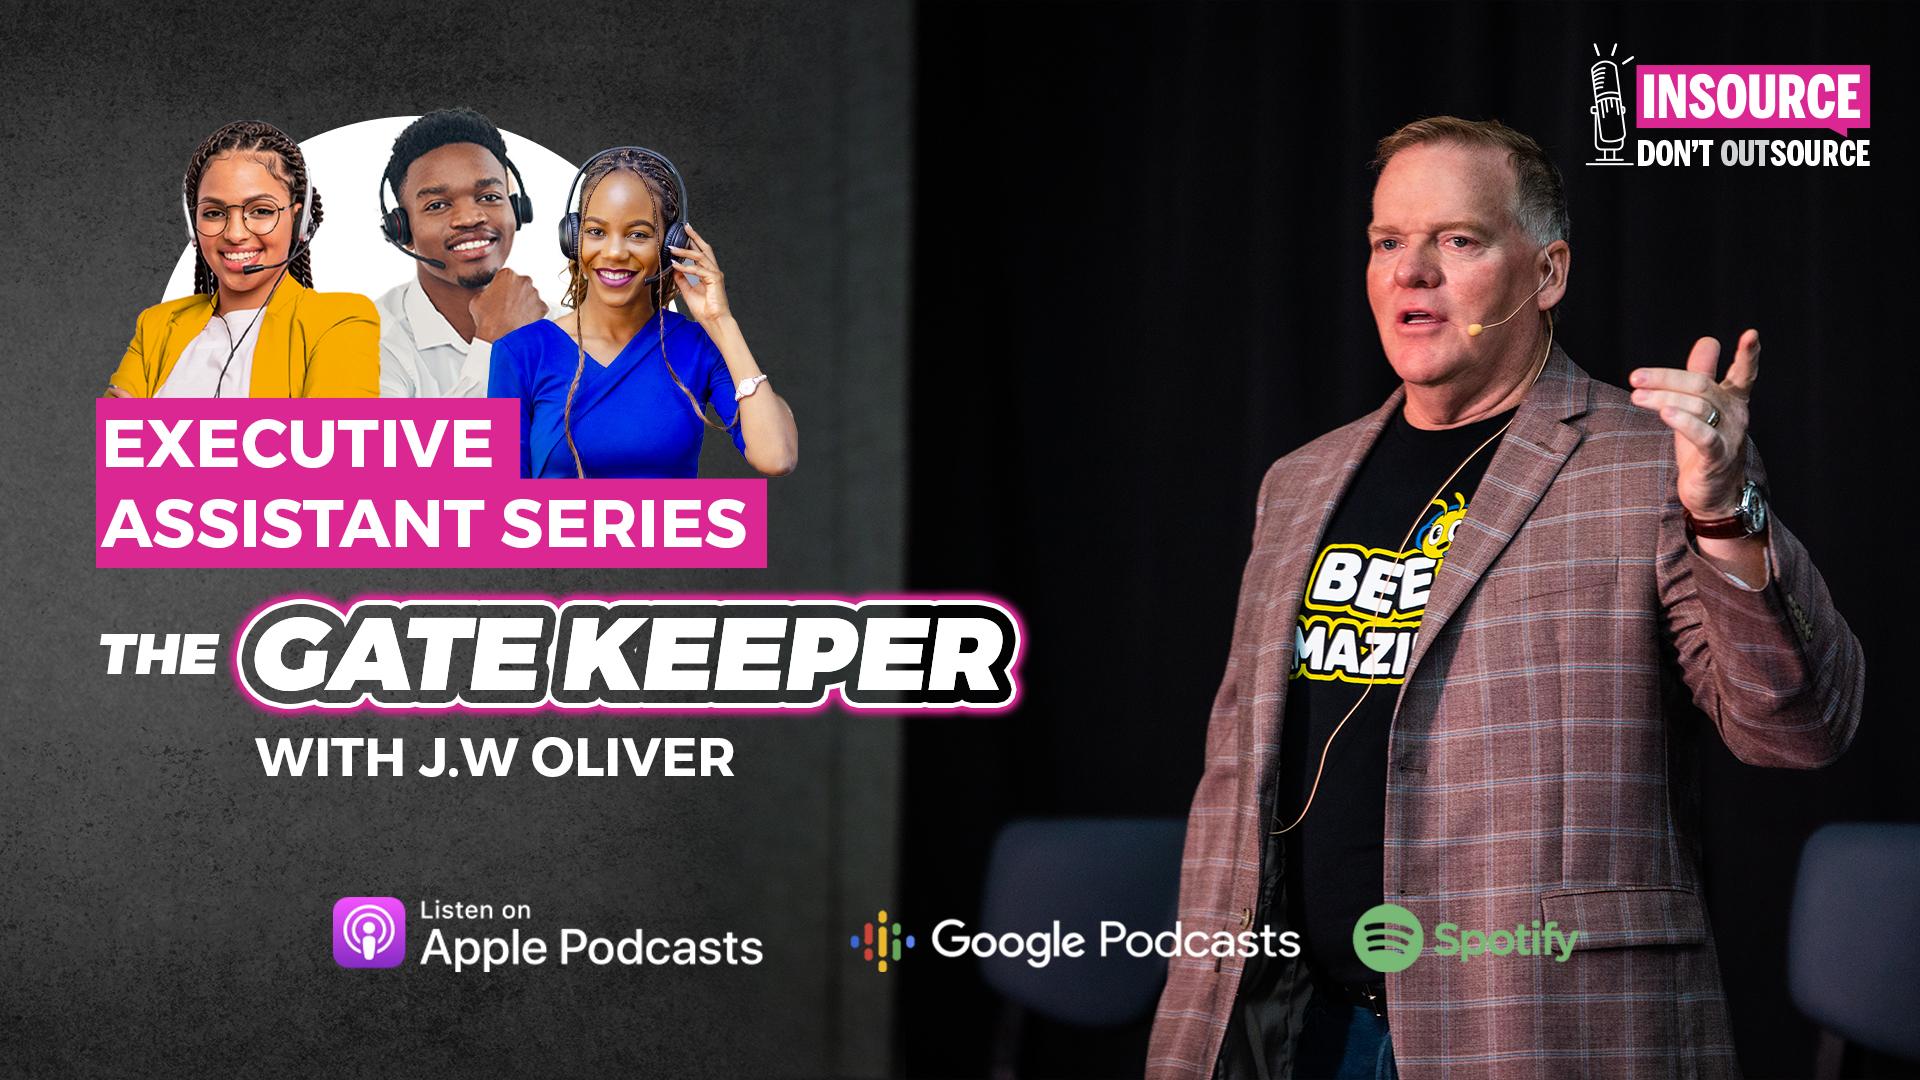 Episode 33 | Executive Assistant Series - The Gatekeeper